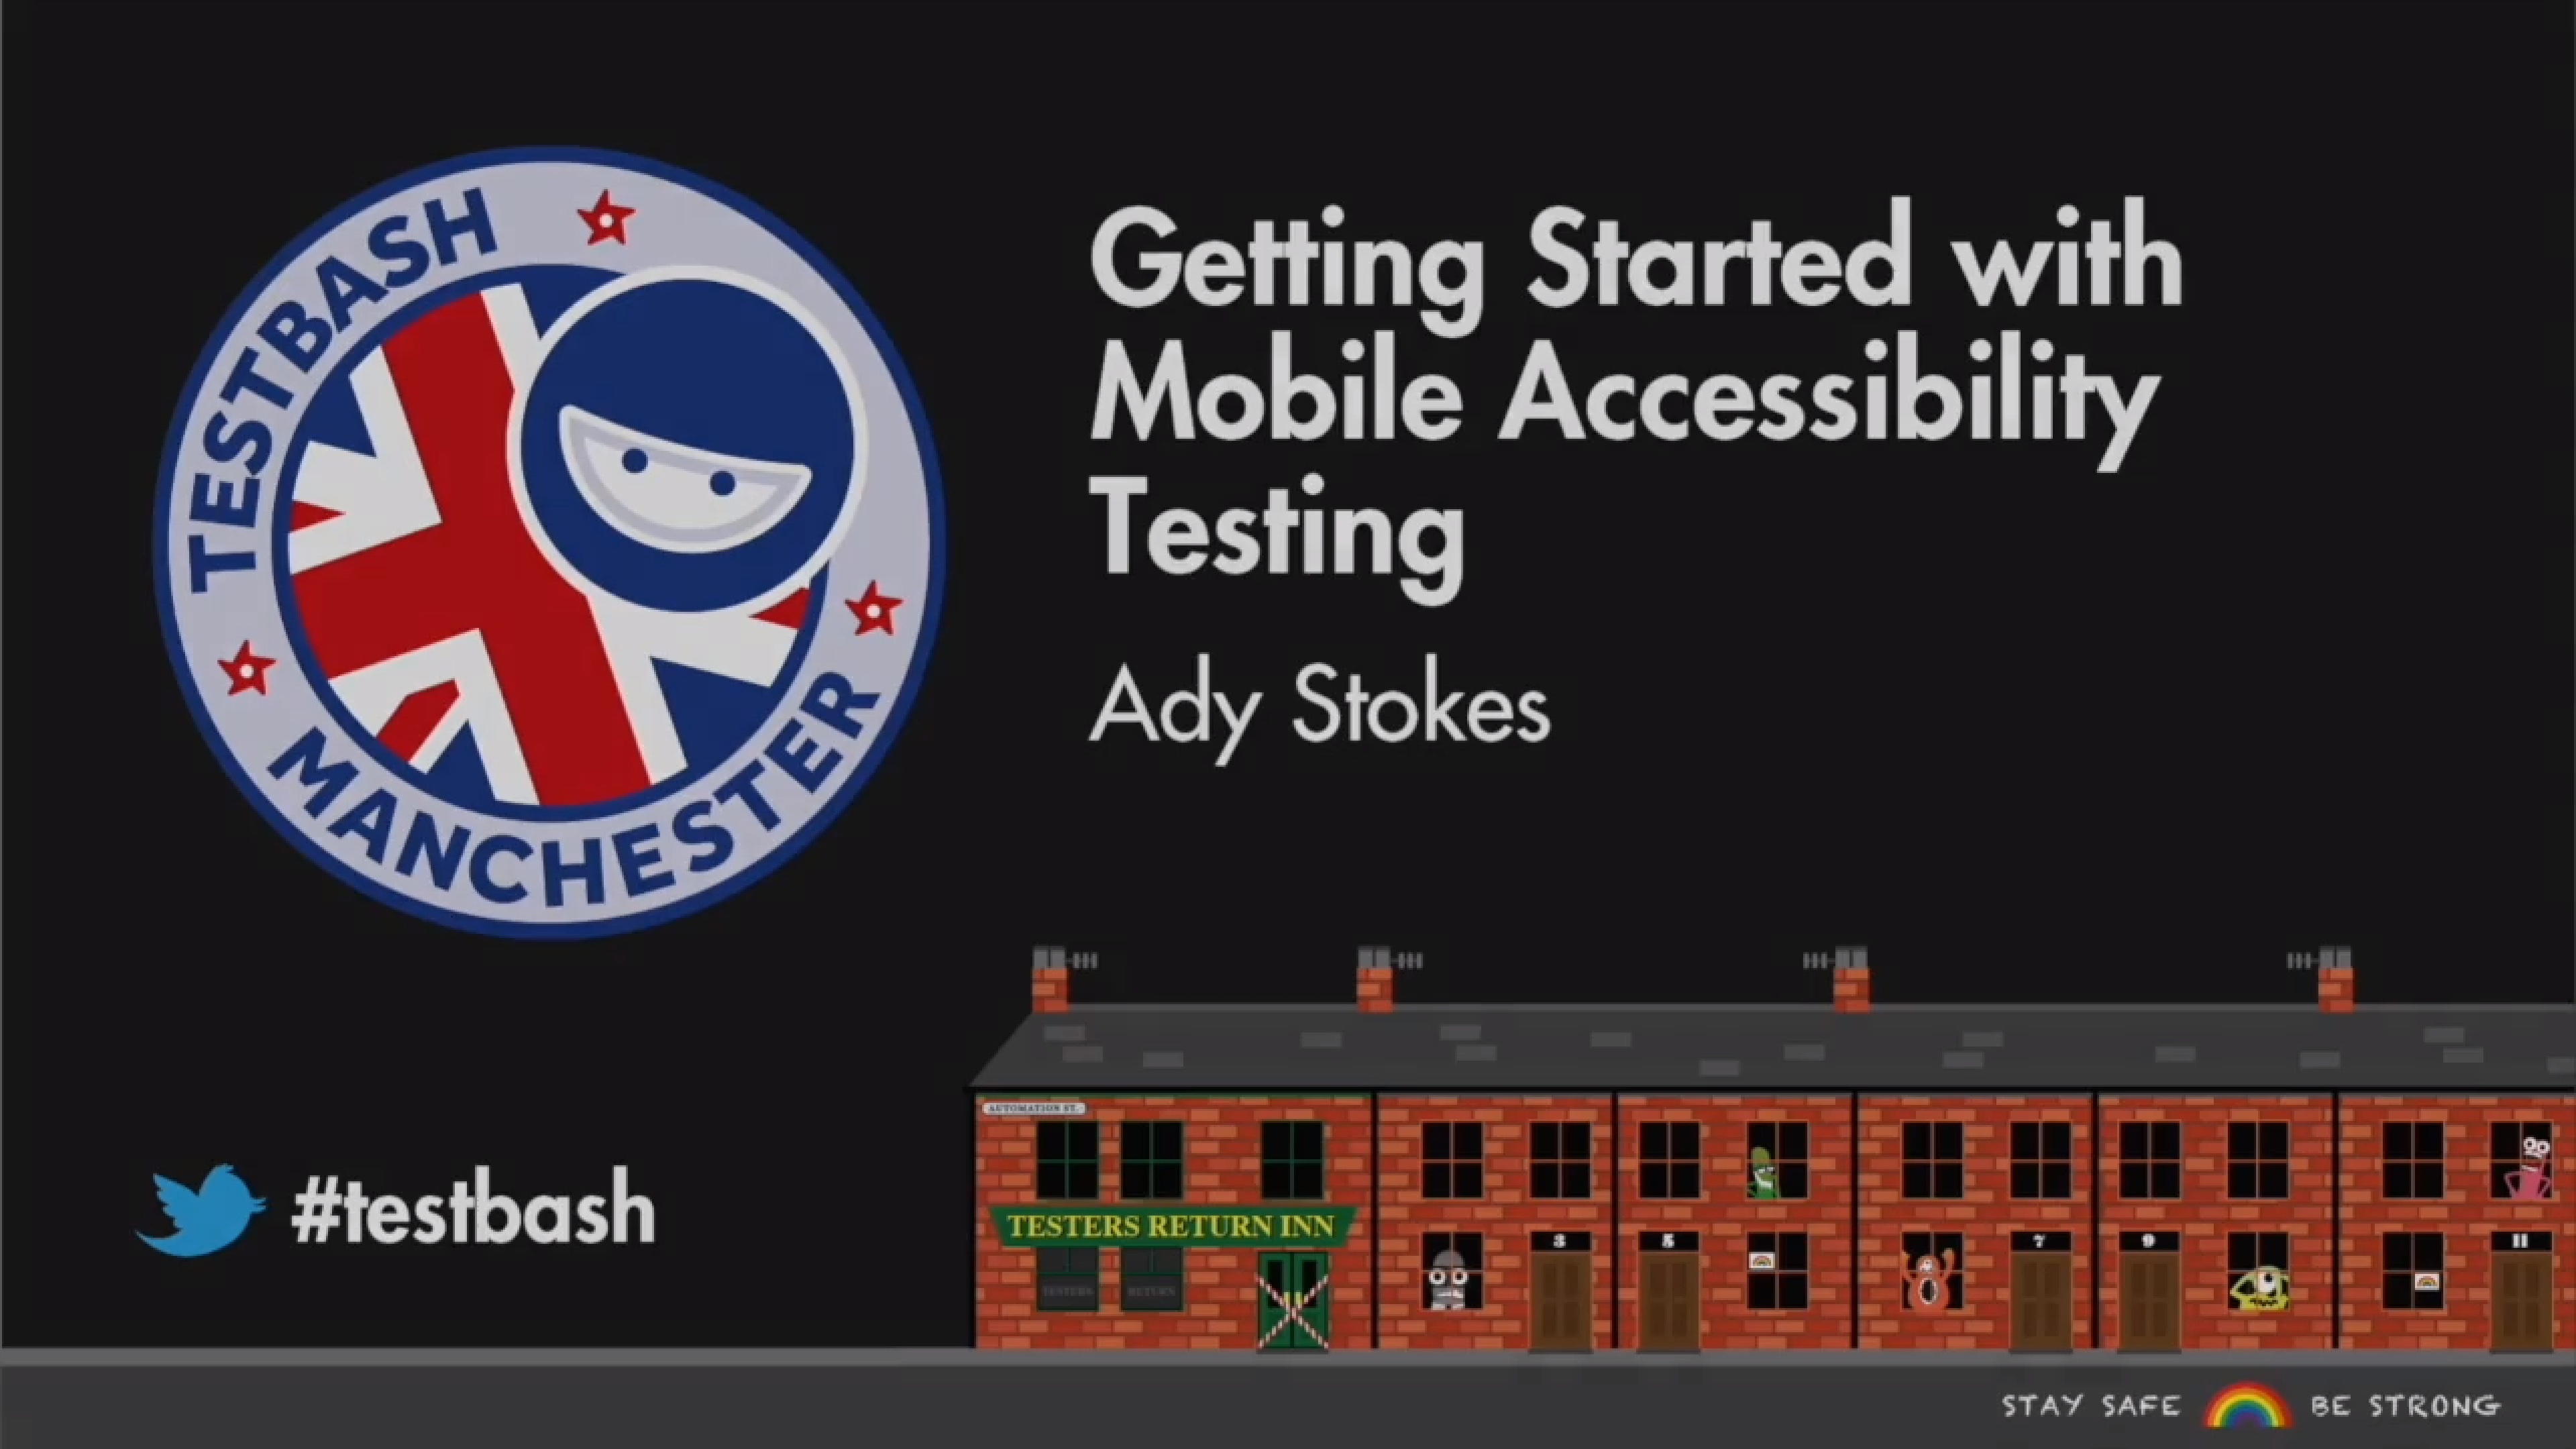 Getting Started With Mobile Accessibility Testing - Ady Stokes